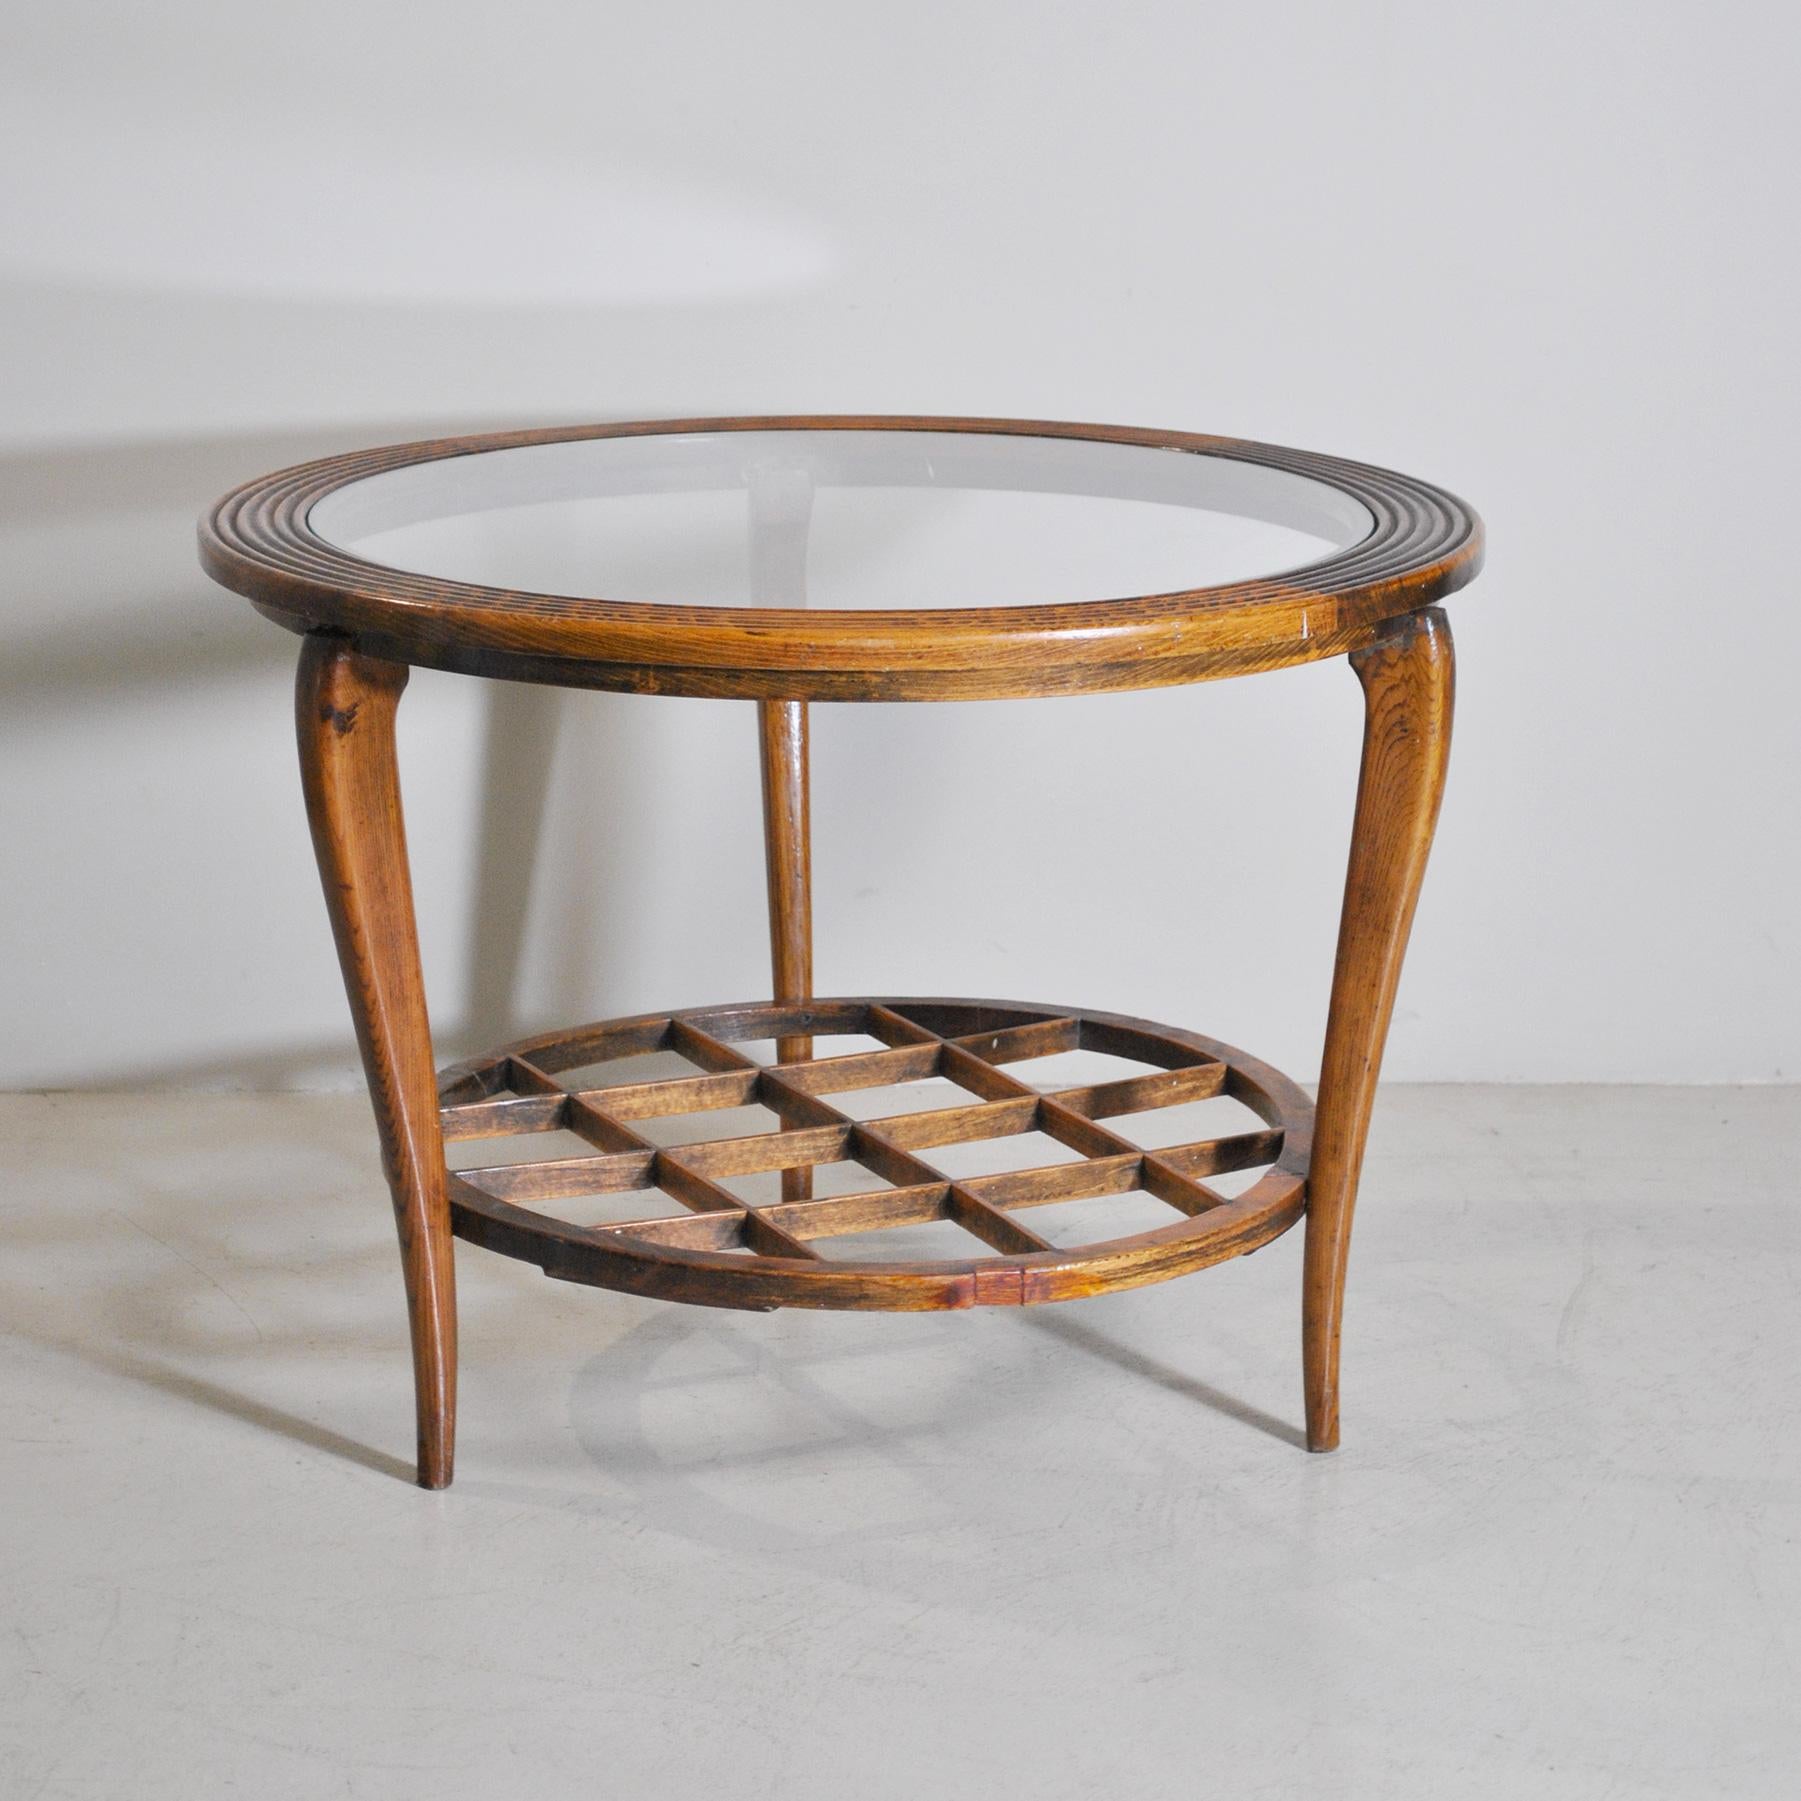 Circular coffee table with glass top lower shelf in intertwined wooden strips Italian production of the 50s by Paolo Buffa.